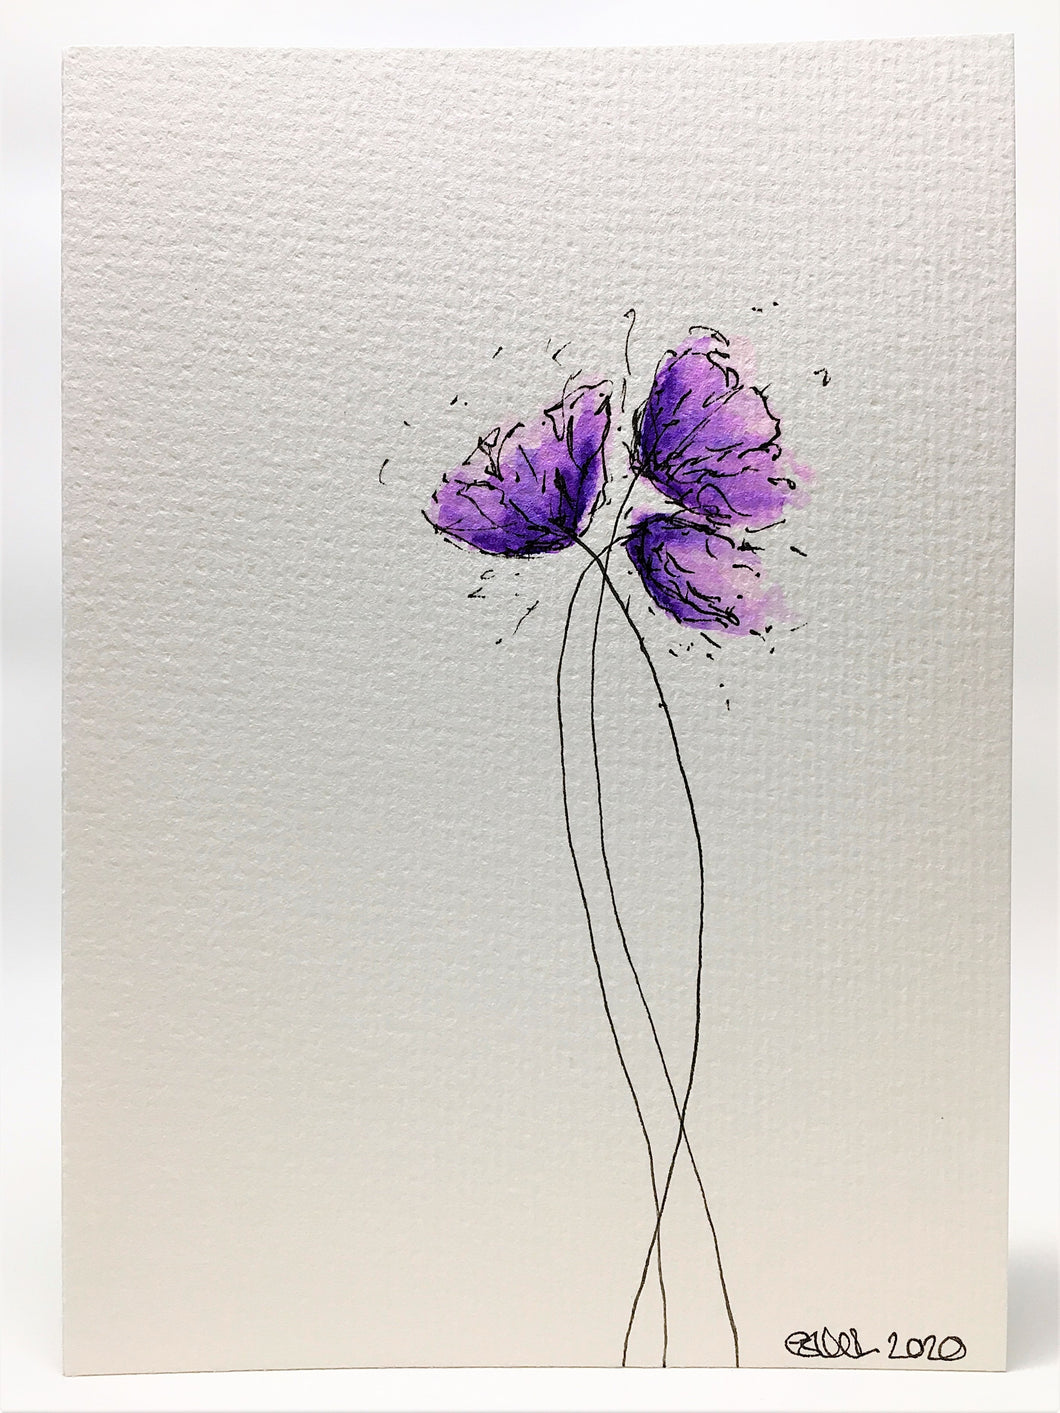 Original Hand Painted Greeting Card - Three Lilac and Purple Poppies - eDgE dEsiGn London